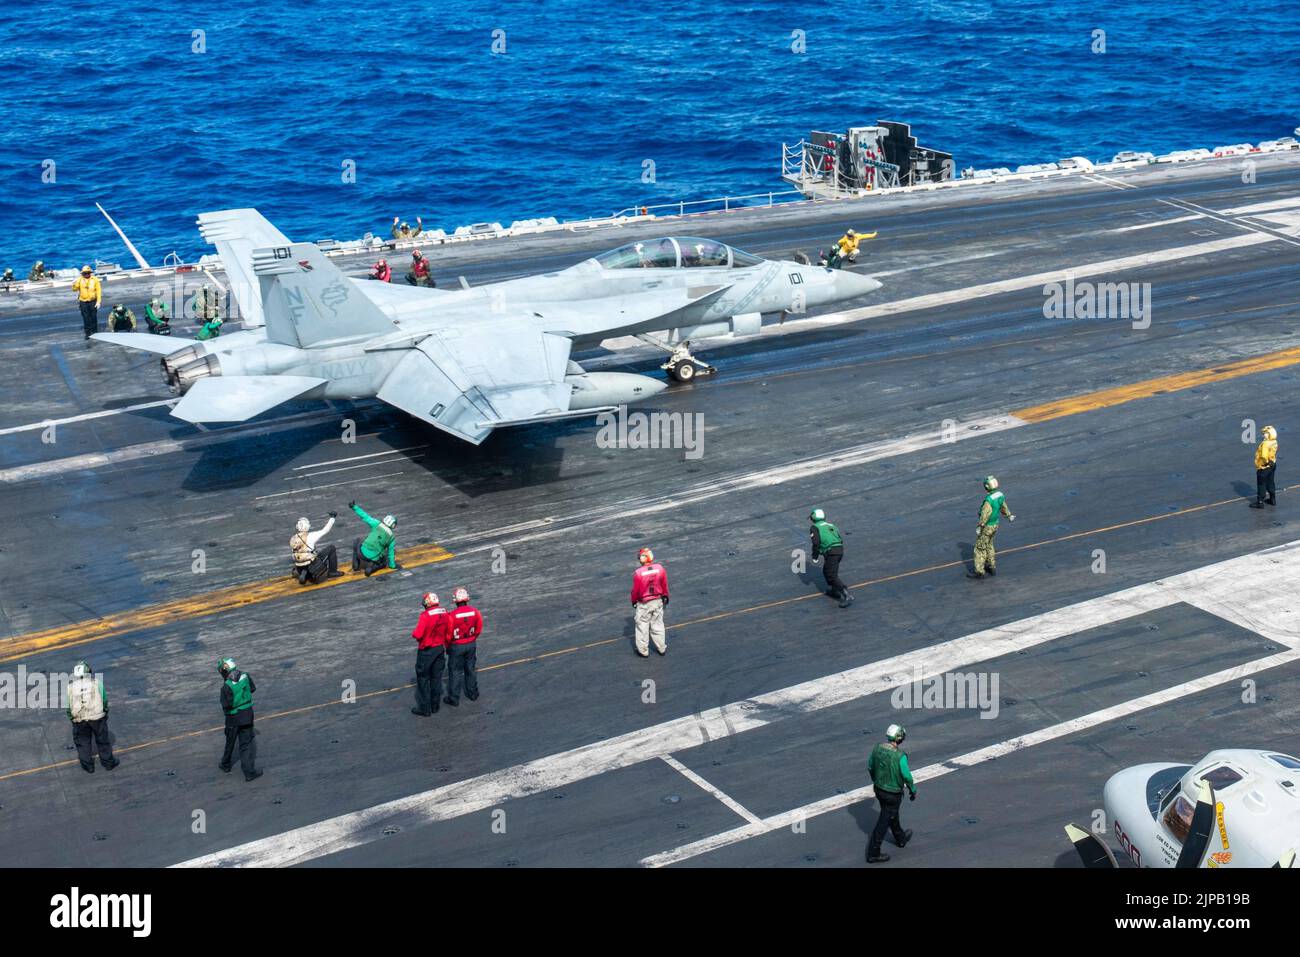 Philippine Sea, United States. 14 August, 2022. A U.S. Navy F/A-18F Super Hornet, attached to the Diamondbacks of Strike Fighter Squadron 102, is given the go for take off from the flight deck of the Nimitz-class aircraft carrier USS Ronald Reagan underway, August 14, 2022 operating on the Philippine Sea. Credit: MC3 Eric Stanton/U.S. Navy/Alamy Live News Stock Photo